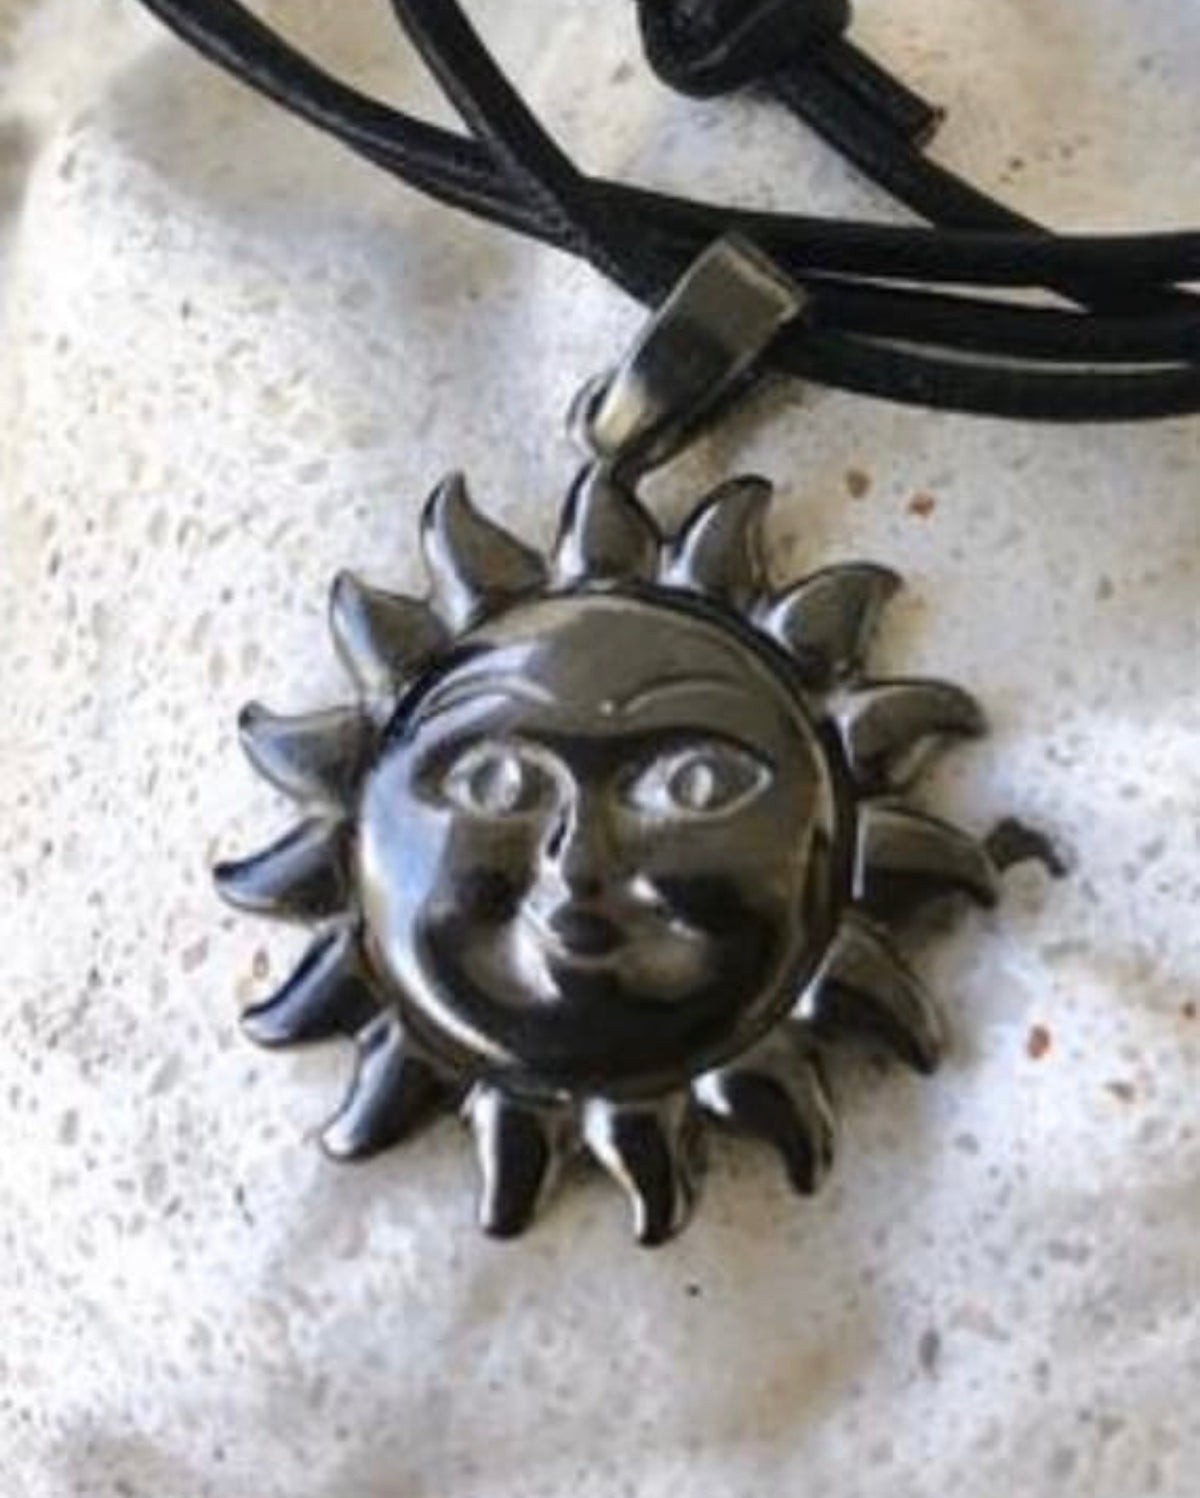 black sun necklace silver smiling sun with paperclip chain